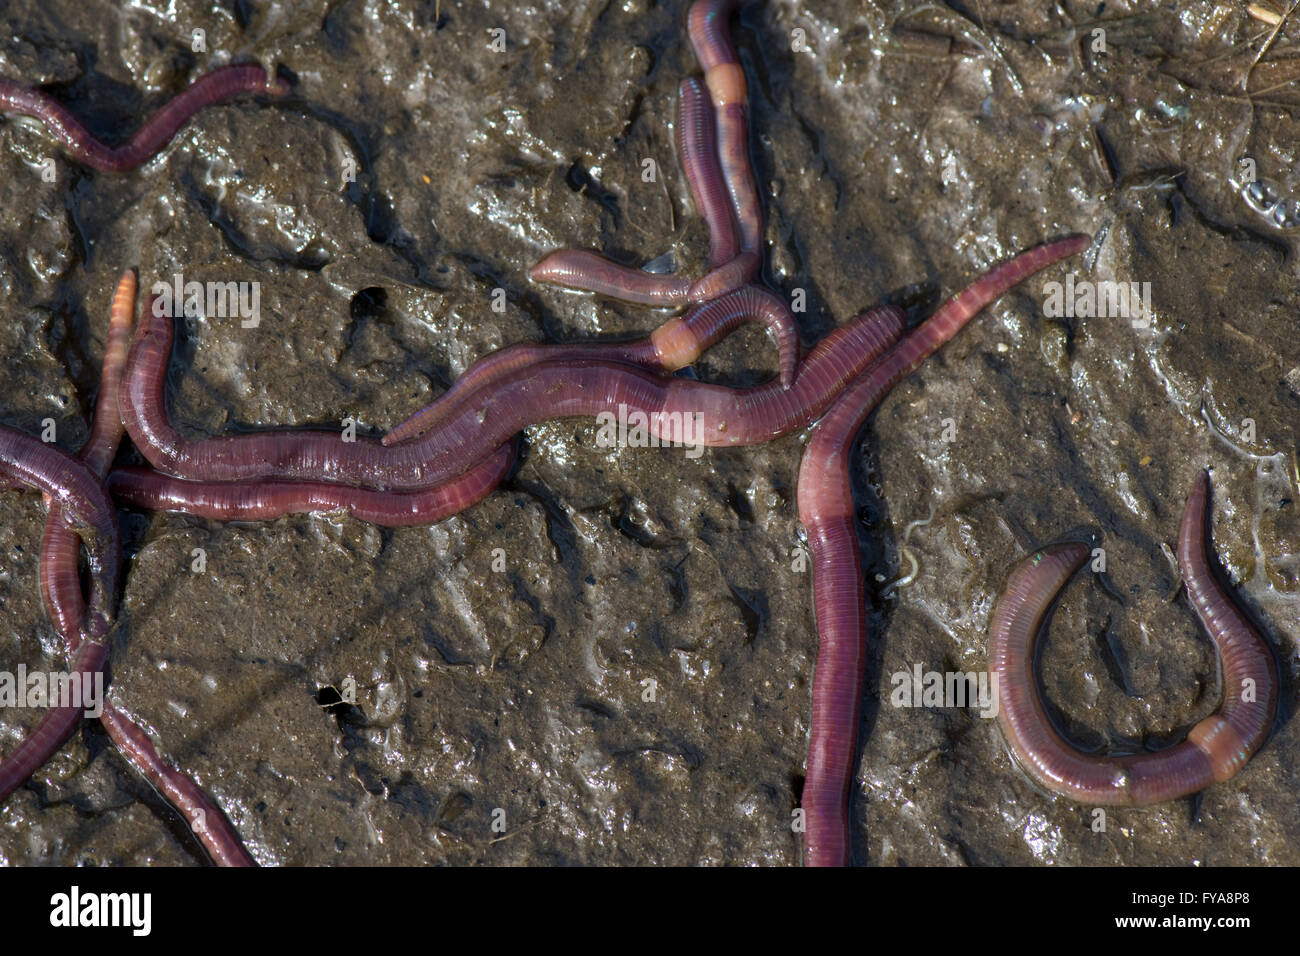 Brandling worms, redworm, tiger wor, Eisenia fetida, on surface of rotting organic material Stock Photo